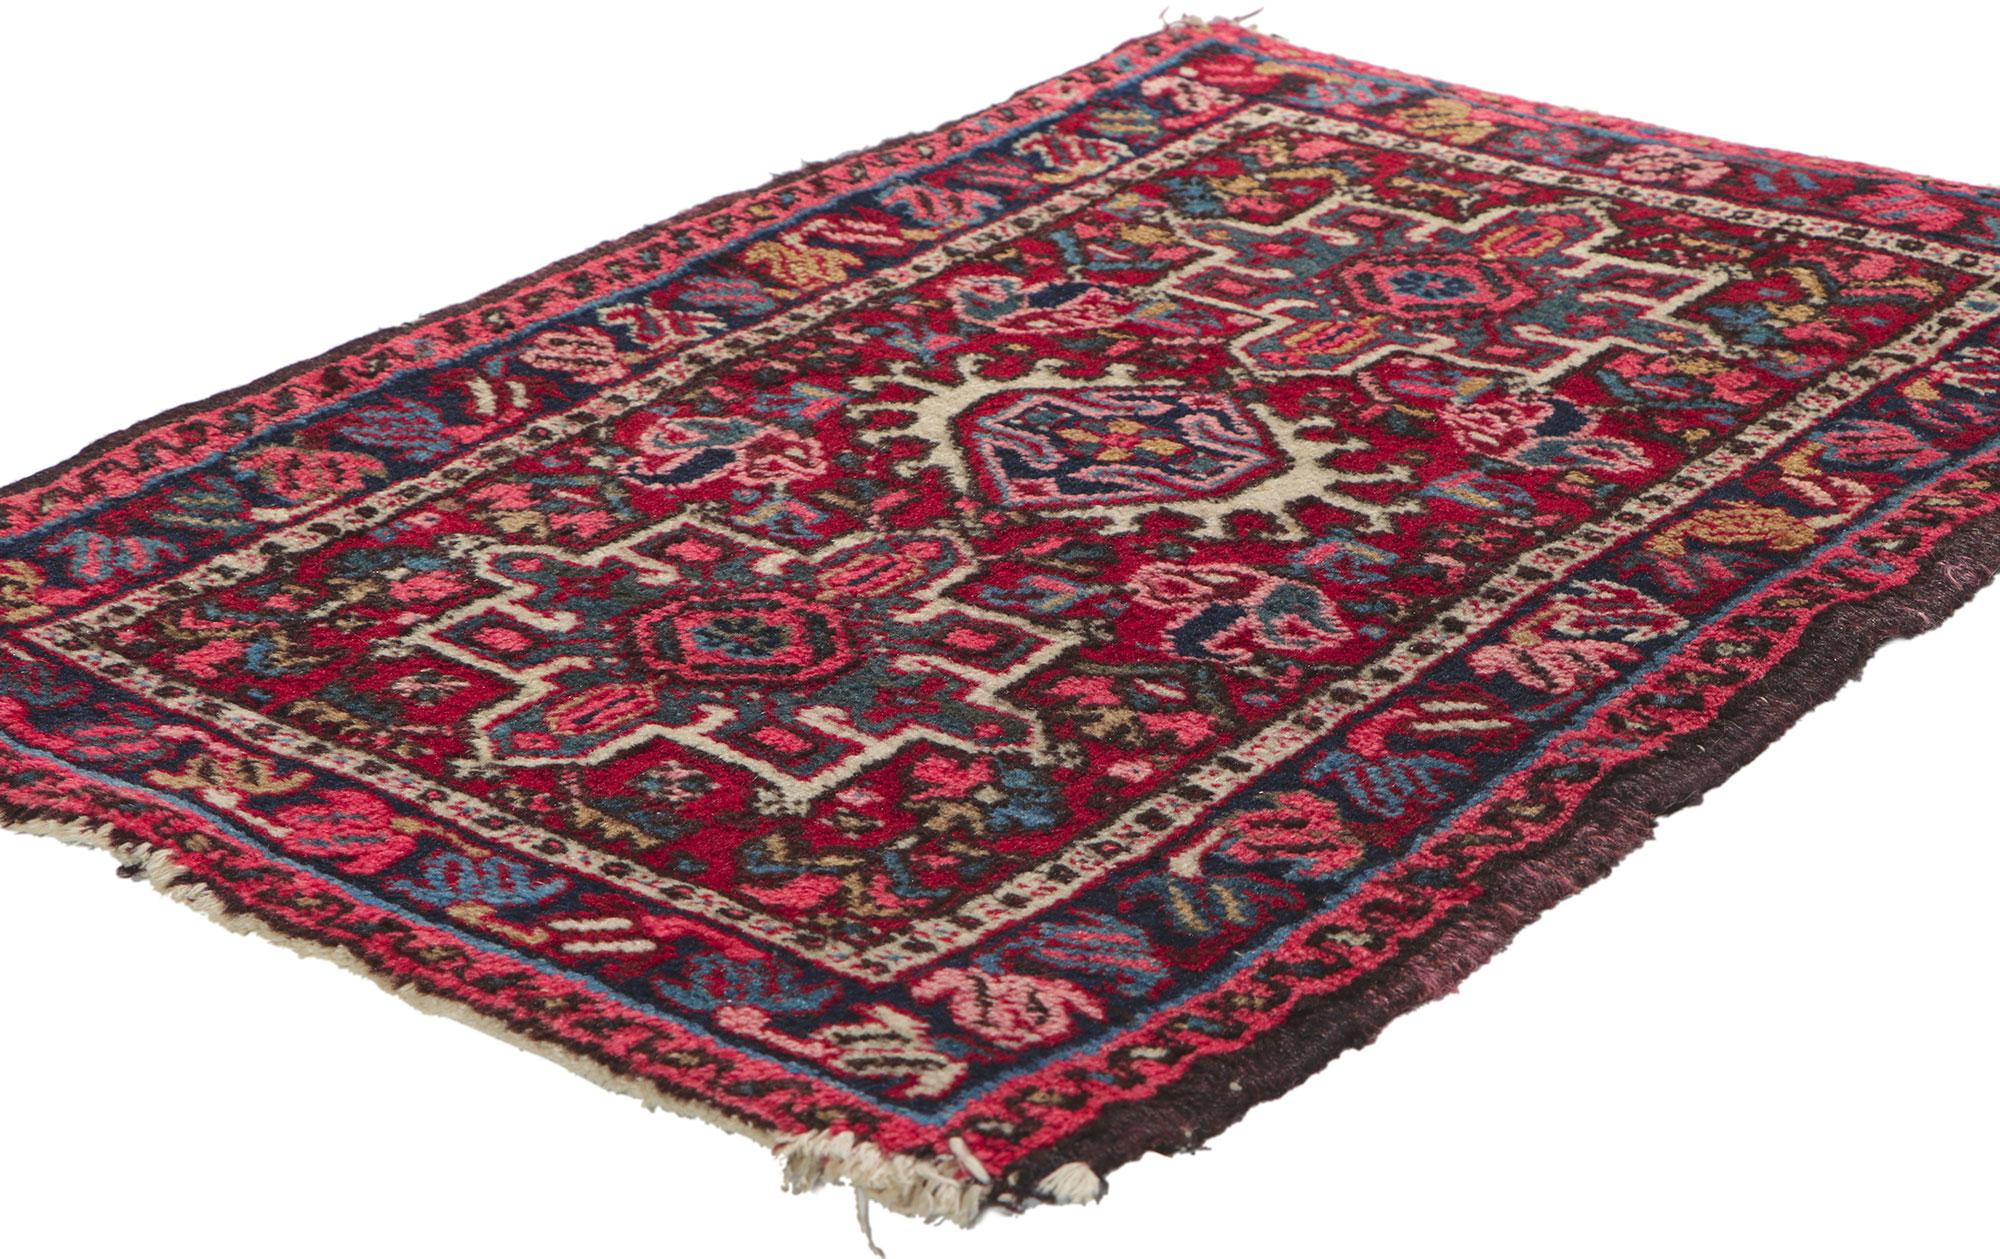 78347 Vintage Persian Heriz rug, 01'11 x 02'10. Showcasing a timeless design with incredible detail and texture, this hand-knotted wool vintage Persian Heriz rug is poised to impress. The eye-catching geometric pattern and traditional color palette